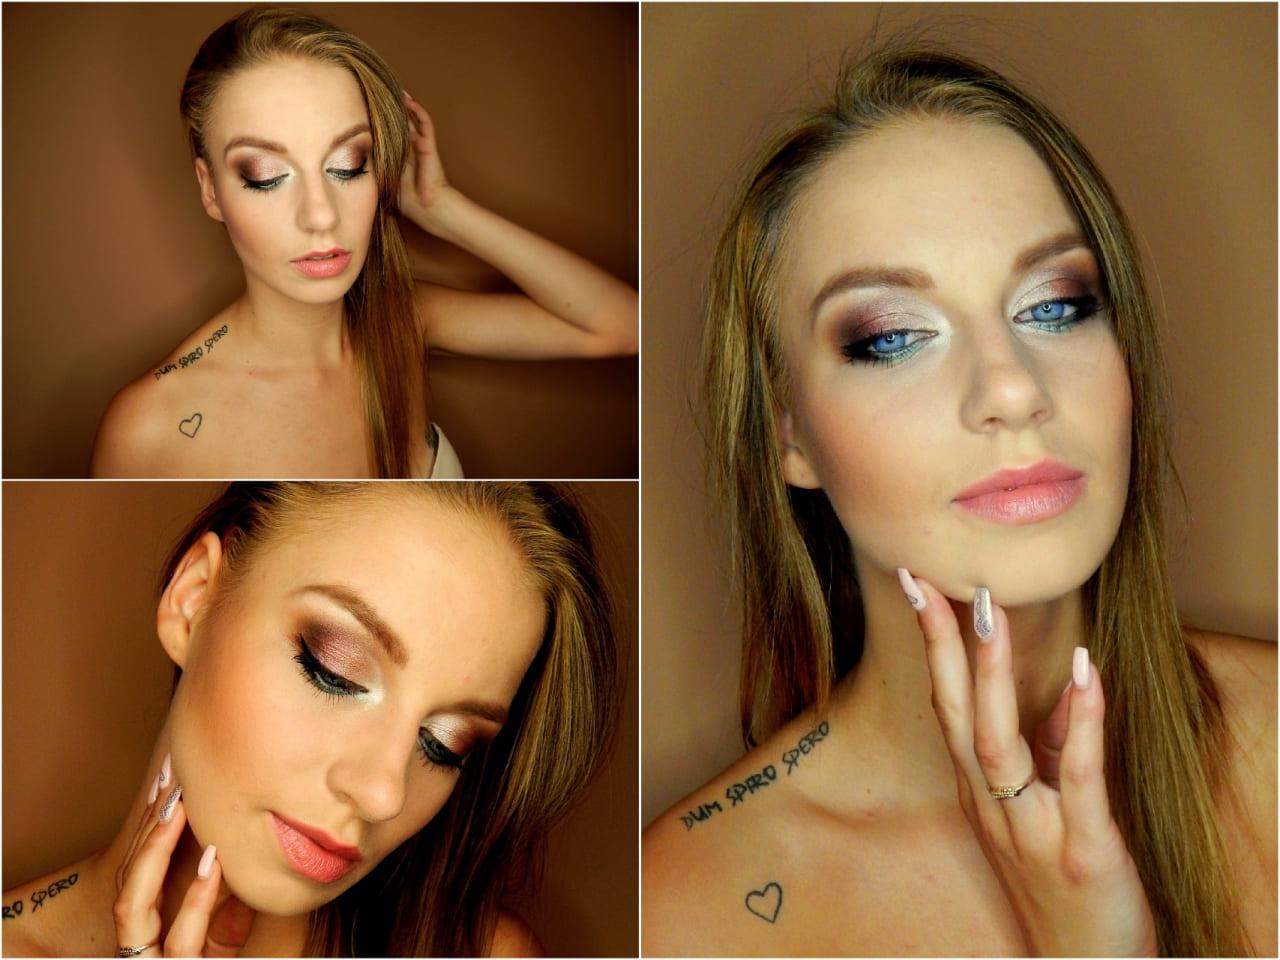 Photo of a model with make-up